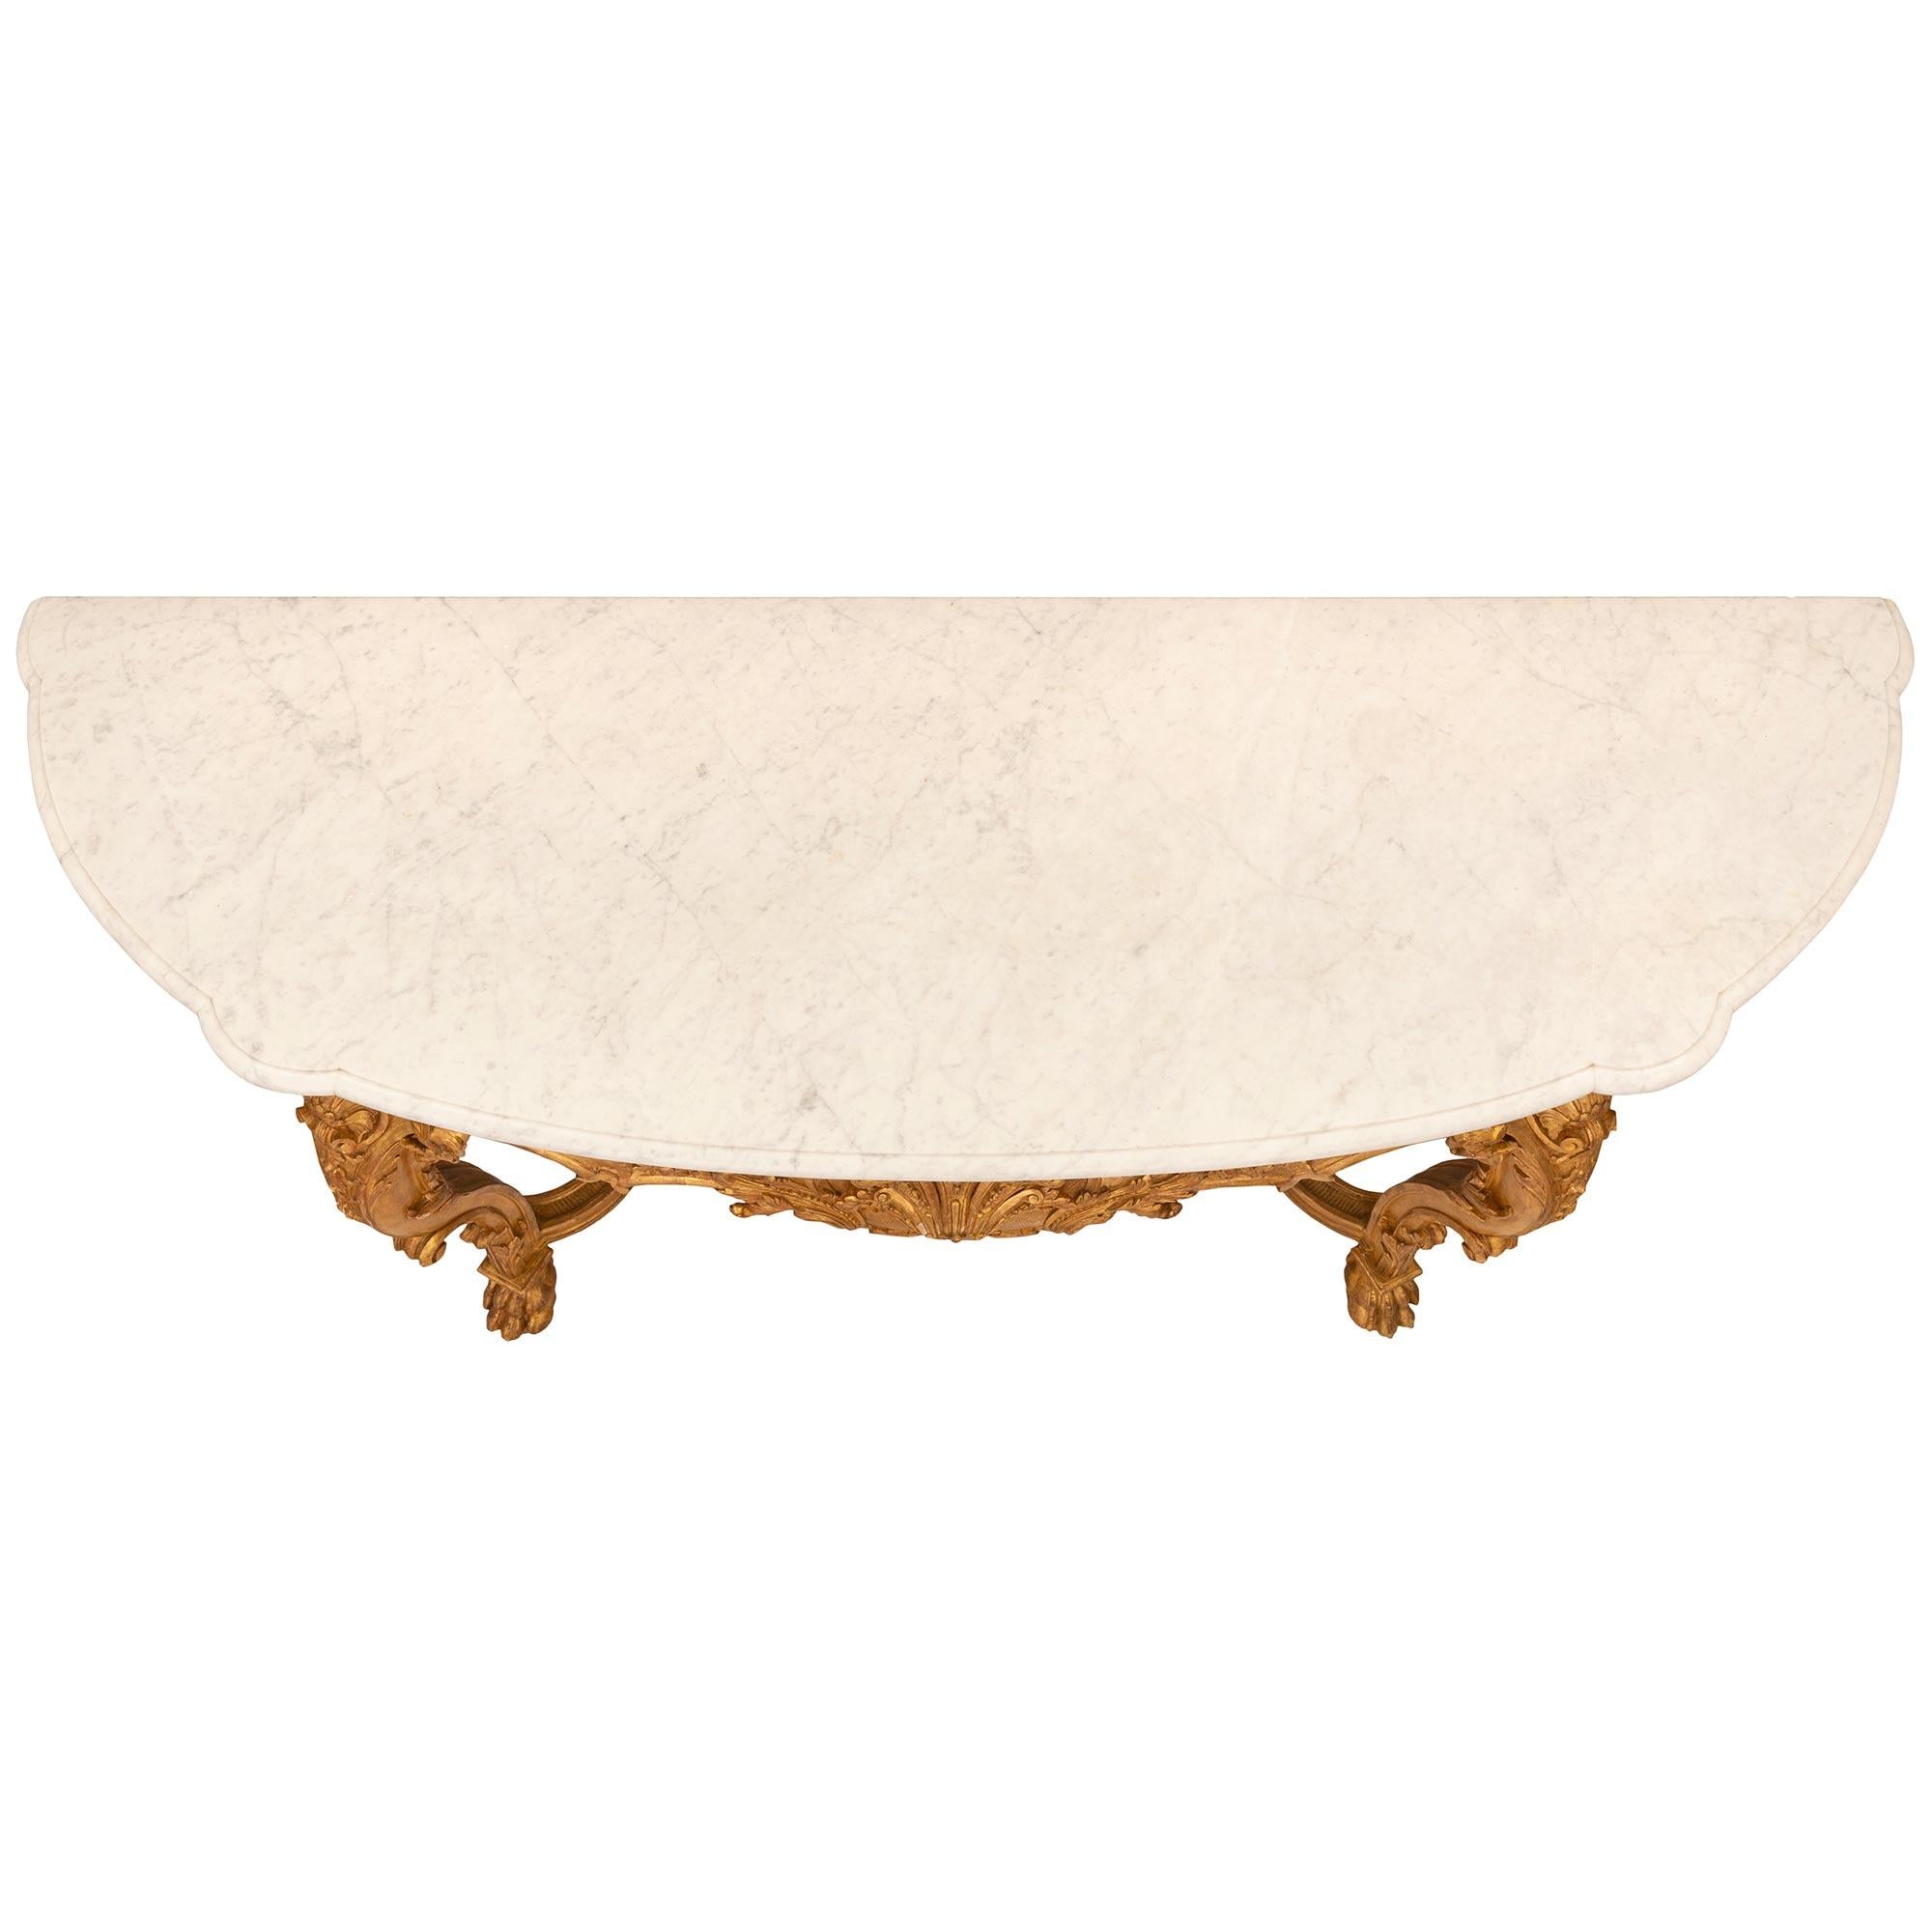 A spectacular and very high quality French 19th century Regence st. giltwood and white Carrara marble console. The freestanding console is raised by beautiful scrolled tapered legs with handsome paw feet and exceptional scrolled foliate designs,